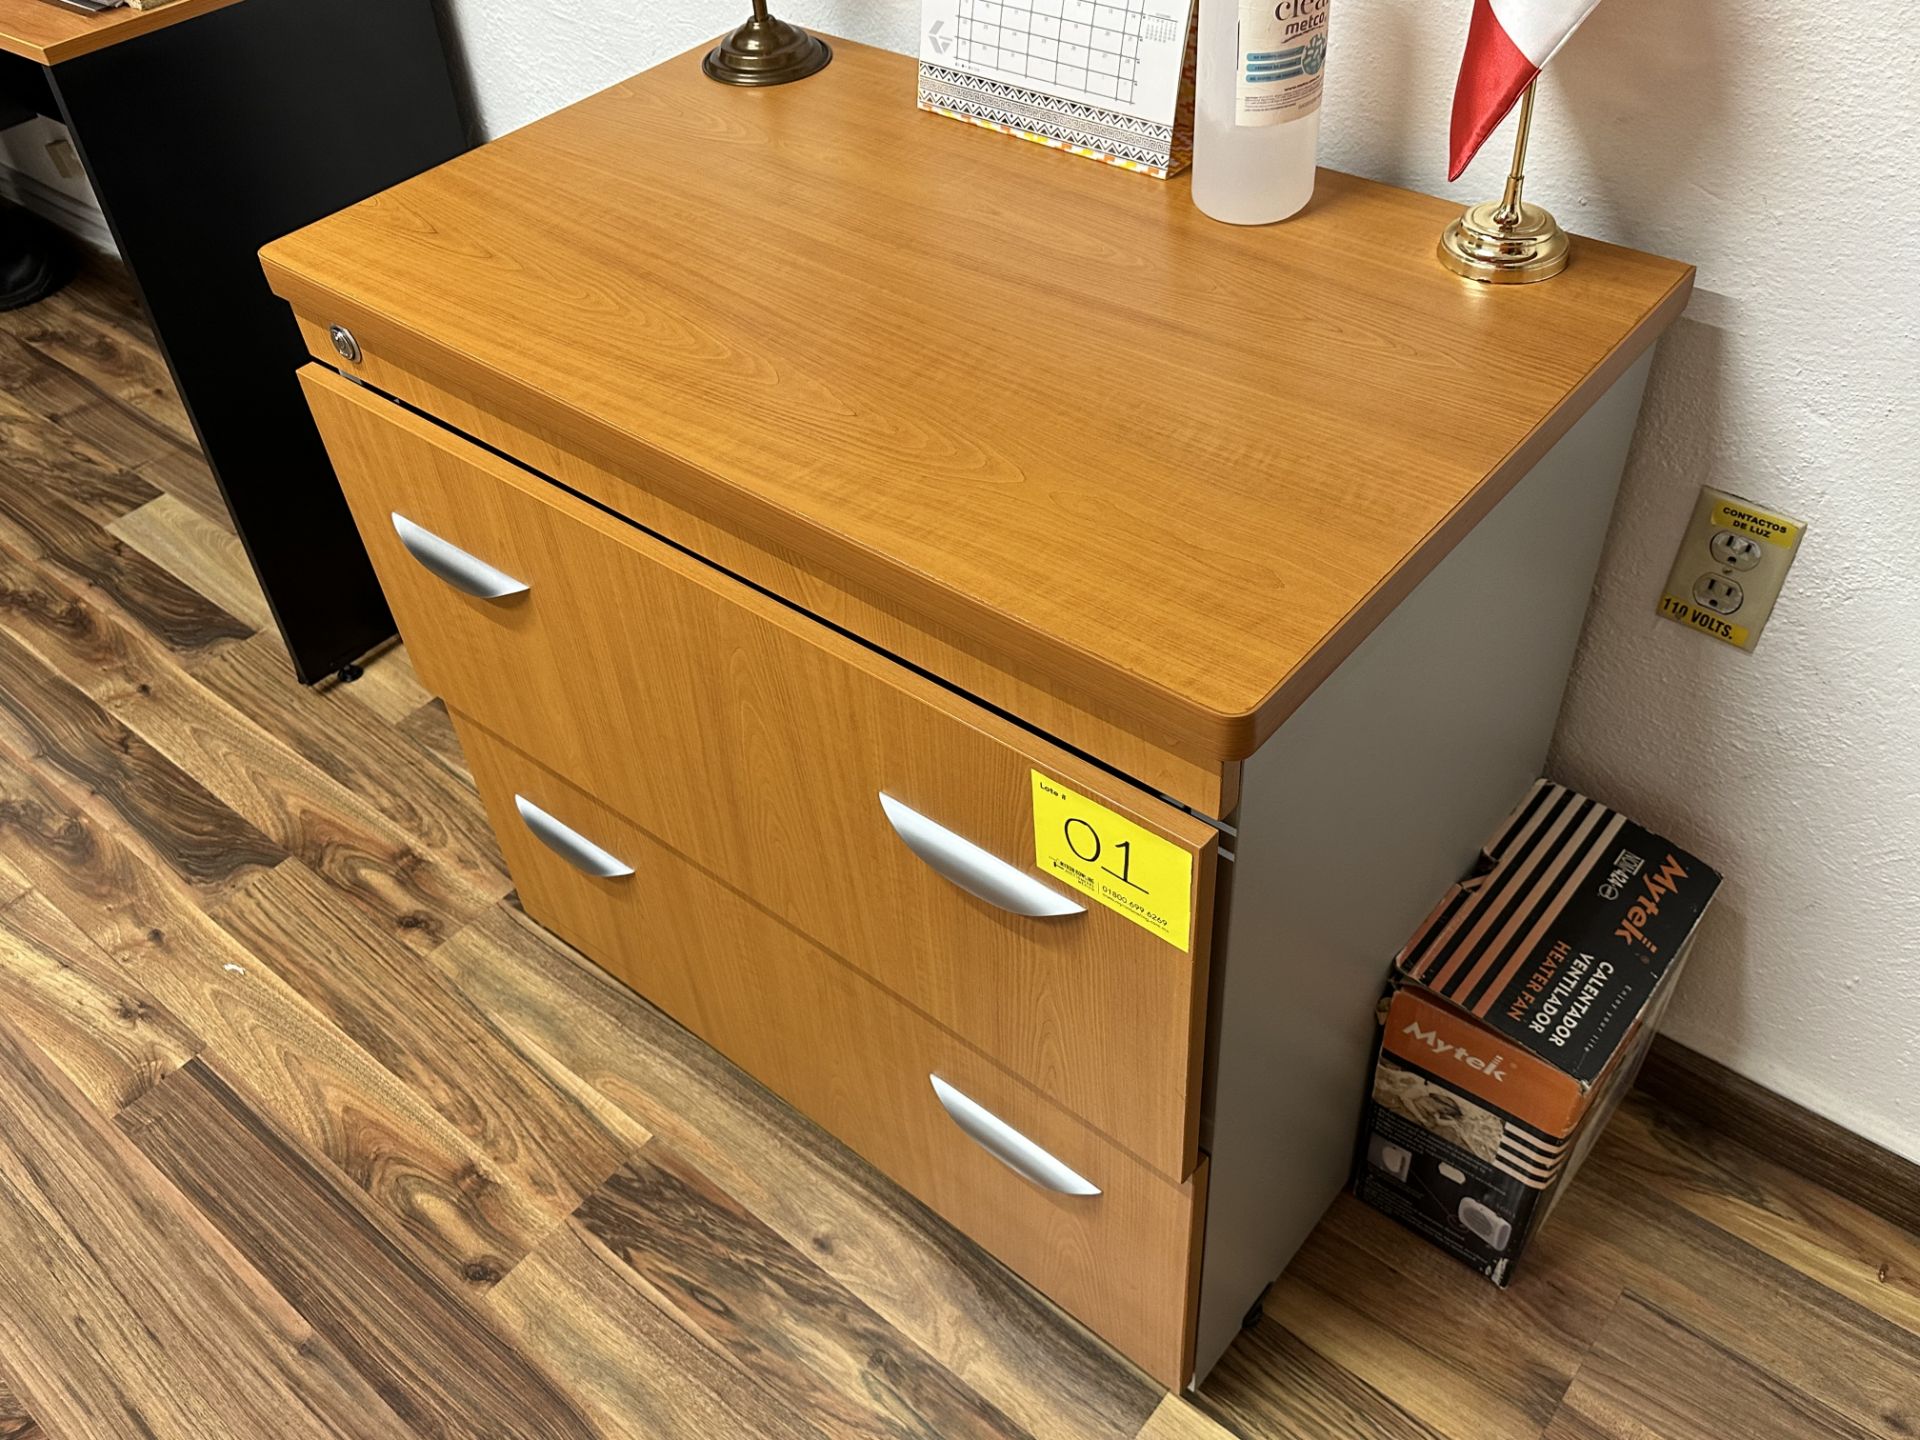 Lot of office furniture includes: 1 Desk in brown wood measures approximately 1.50 x 0.60 x 0.75 m; - Image 12 of 18